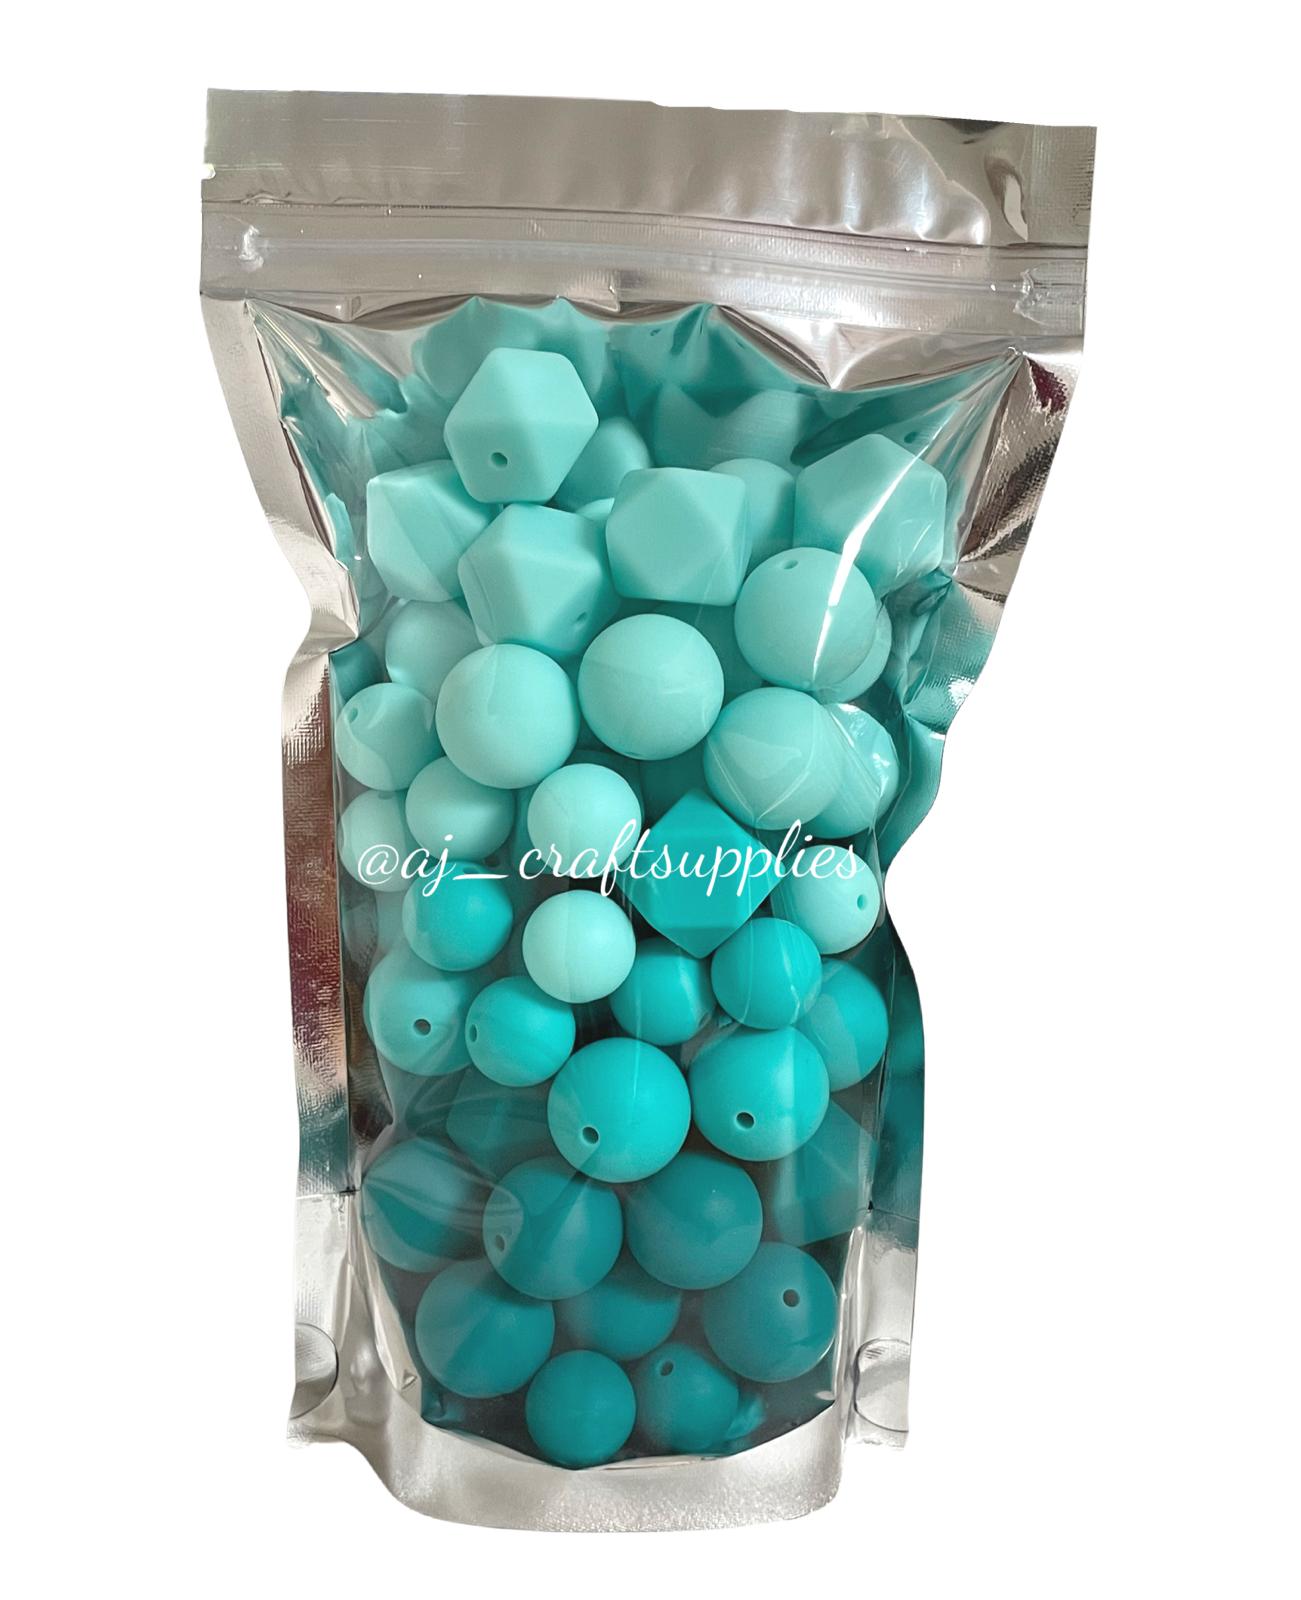 Turquoise Green Ombre - Variety Pack - 75 Silicone Beads